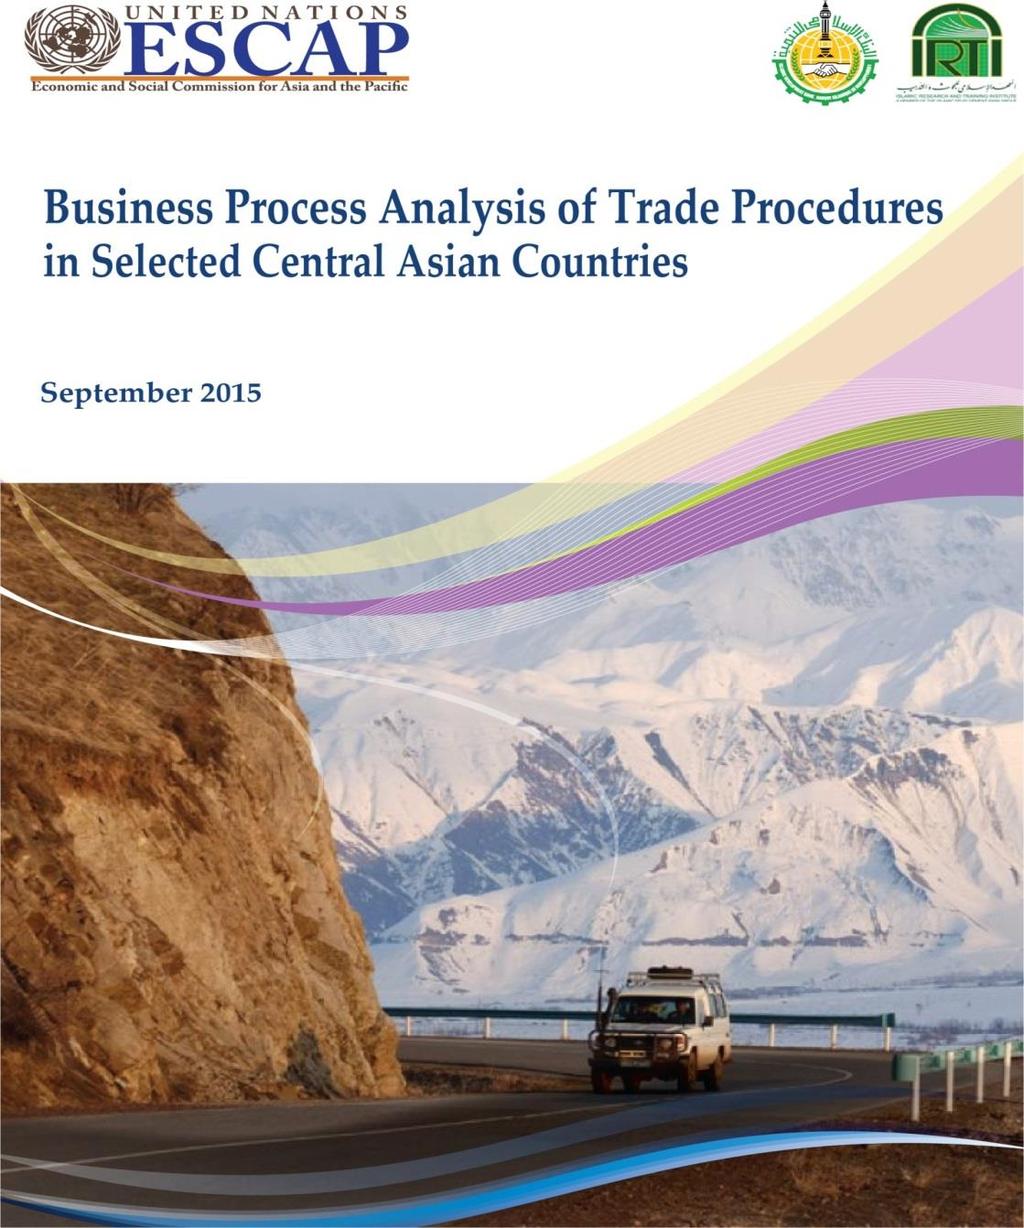 Completed studies in selected LLDCs in Central Asia BPA studies were carried out for selected products along